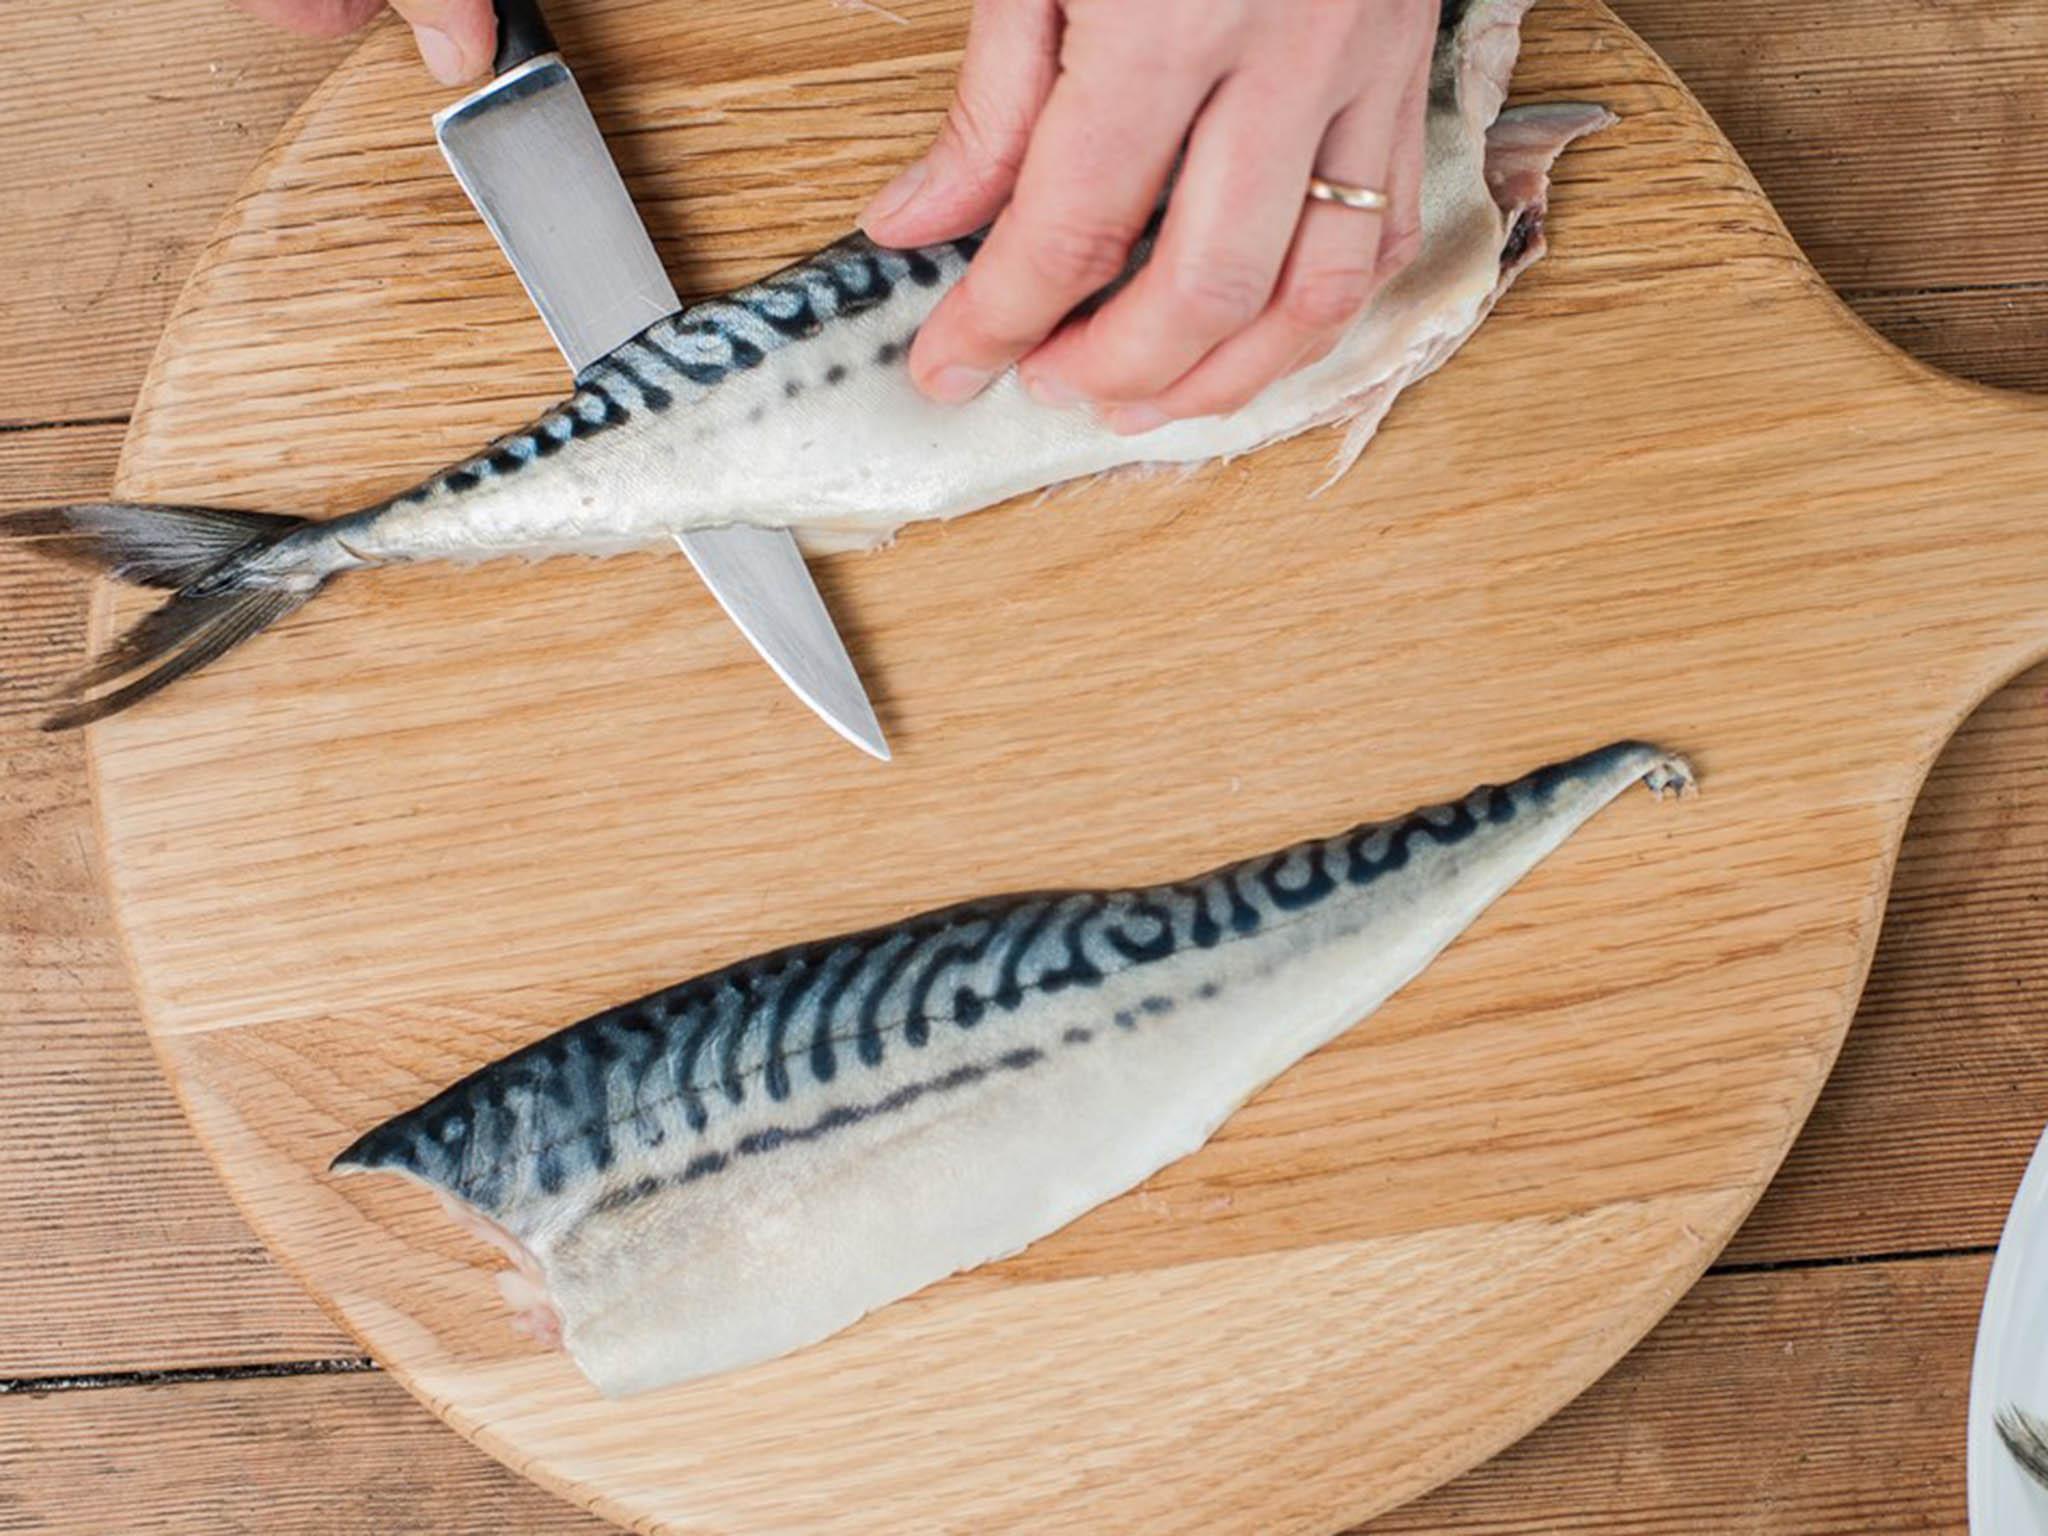 How to fillet mackerel and recipes from pate to kedgeree - The Independent